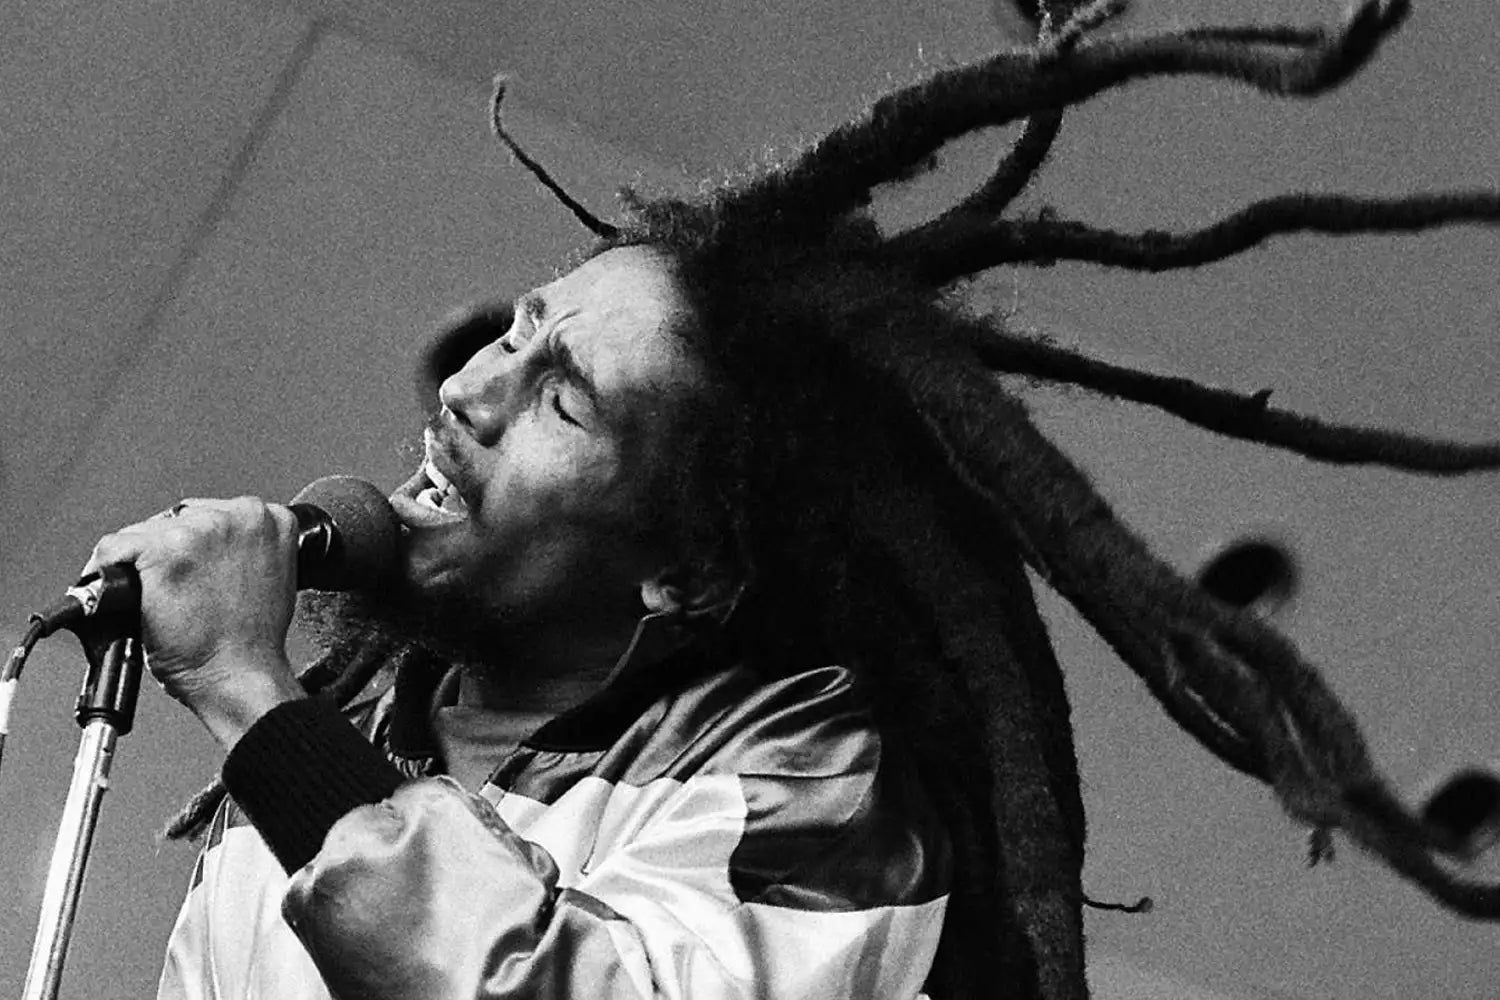 Reggae star Bob Marley singing on a black and white stage, hair flying about.